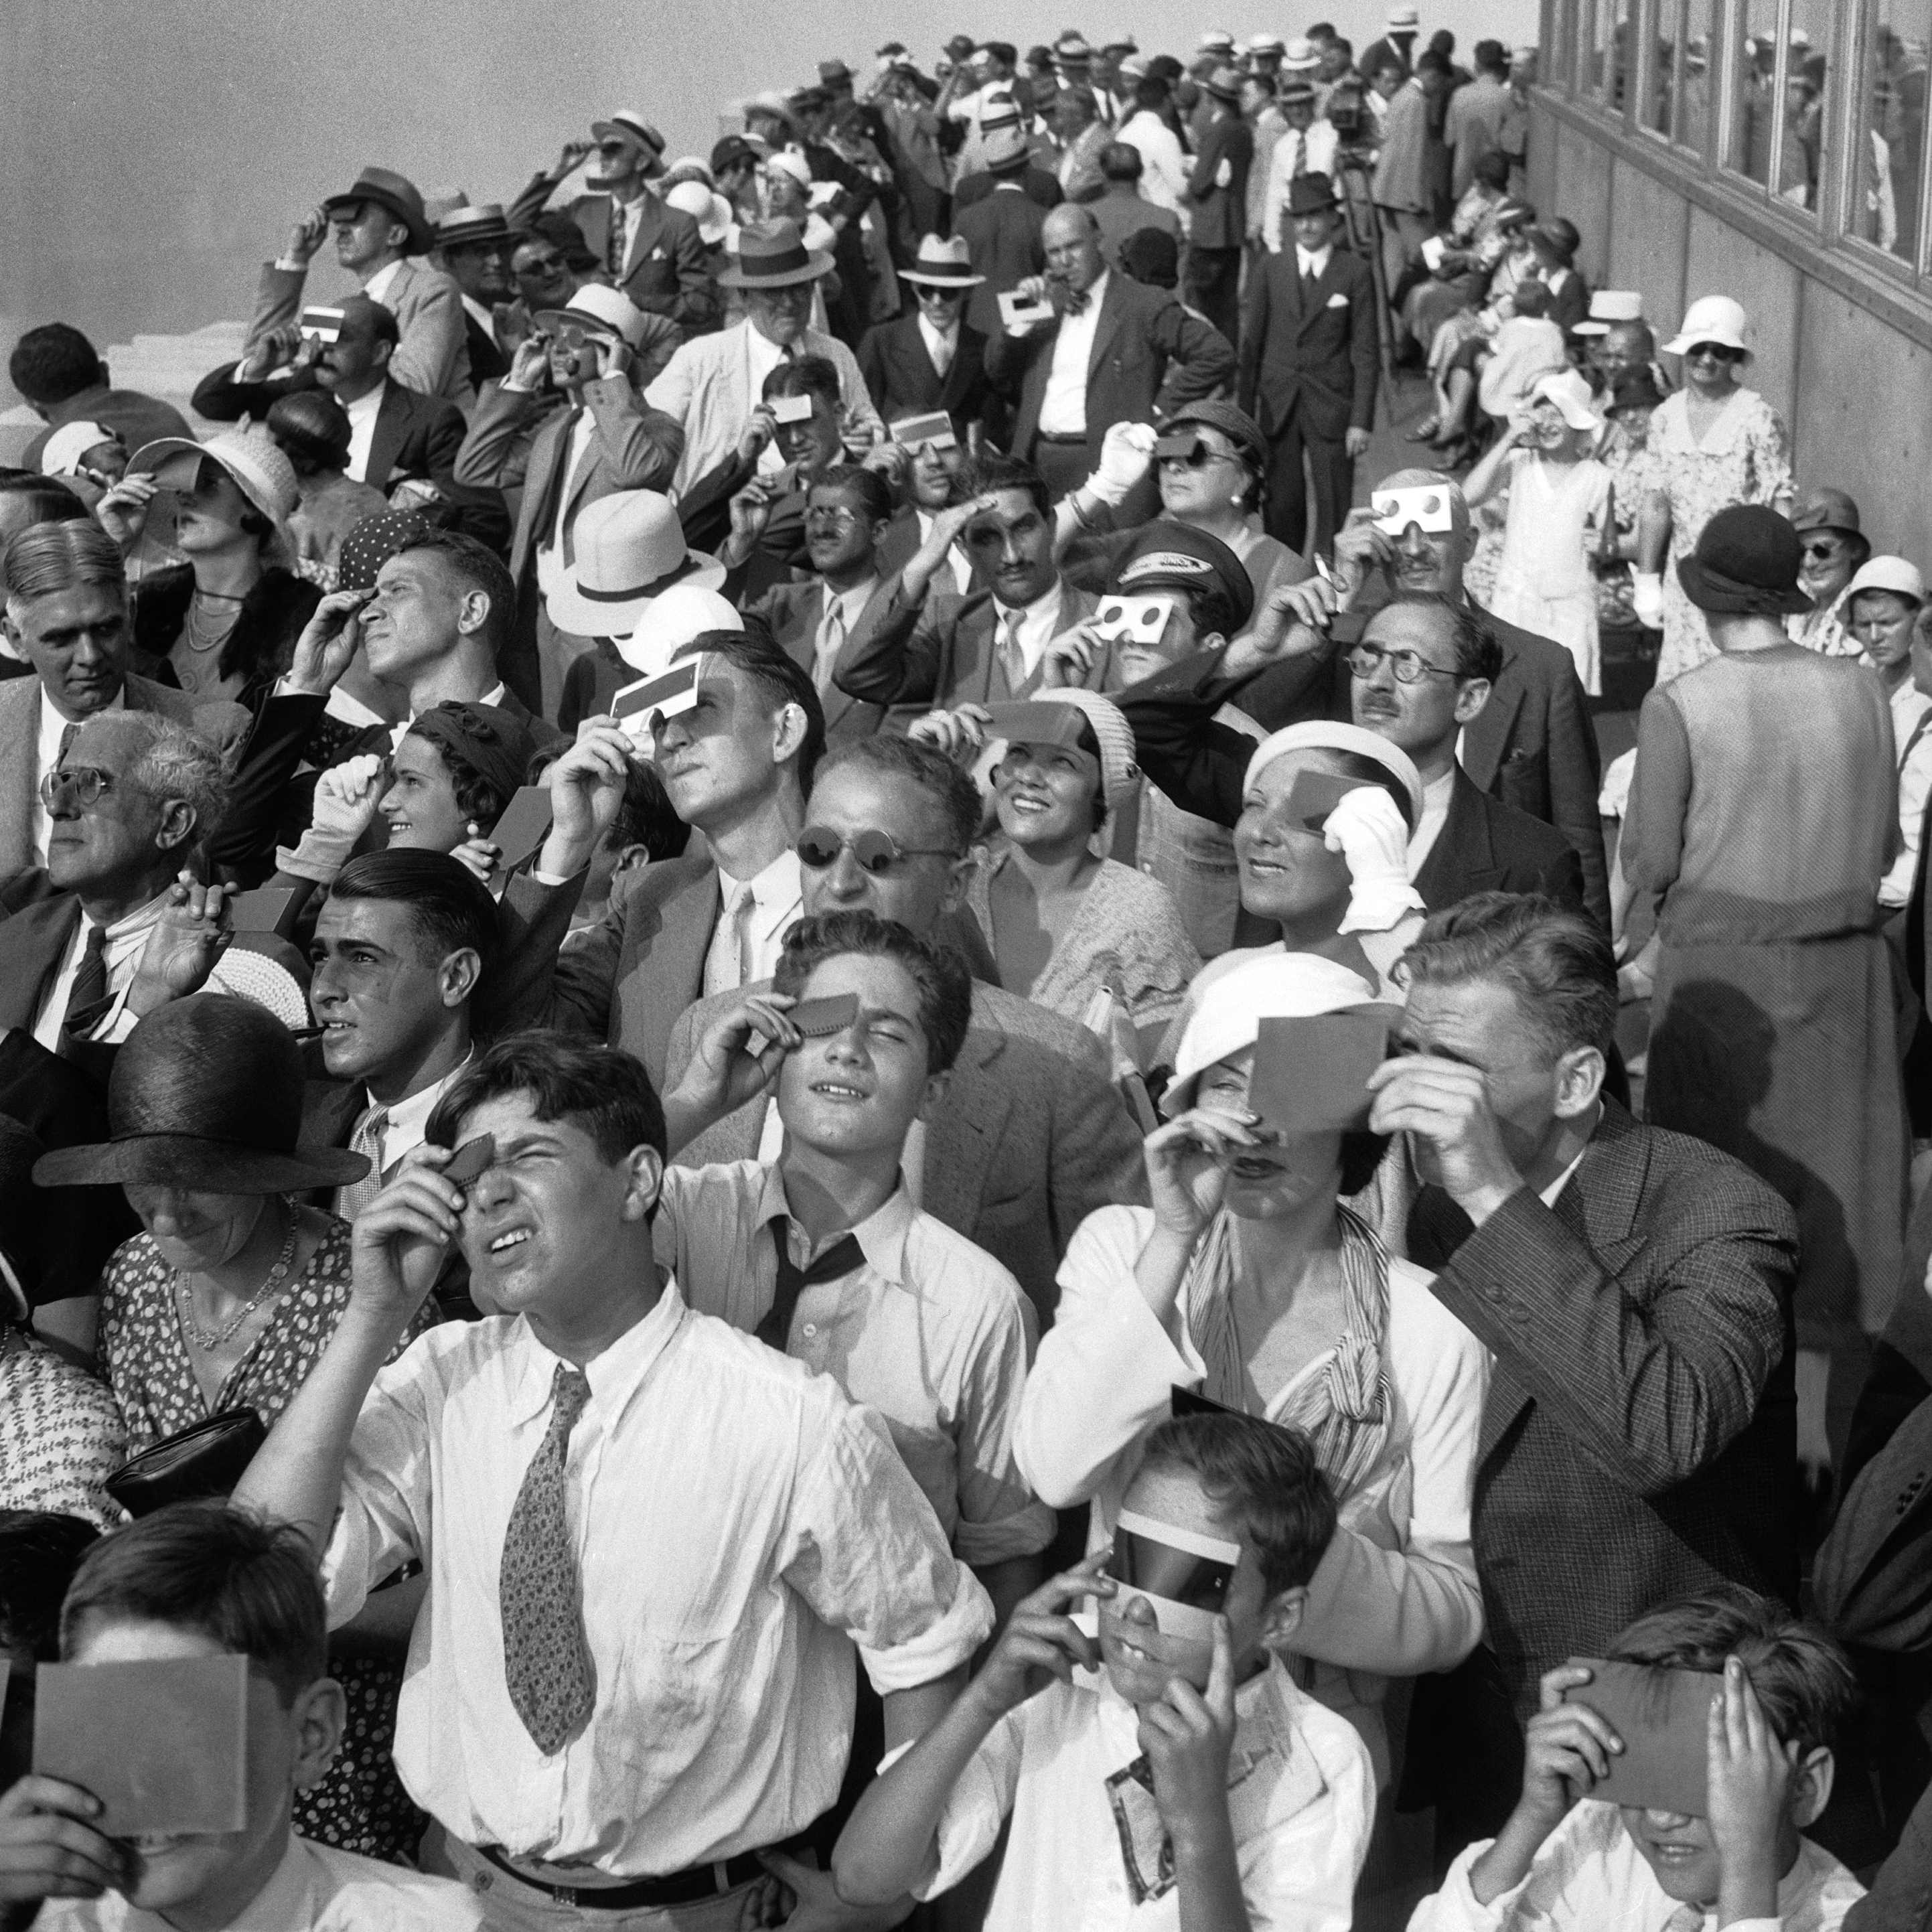 Indiana's total solar eclipse is less than 50 days away! Here's a look at how people enjoyed total solar eclipses in years past. Eclipse watchers squint through protective filters as they view an eclipse of the sun from the top deck of New York's Empire State Building in New York on Wednesday, Aug. 31, 1932. (AP Photo/File, File)